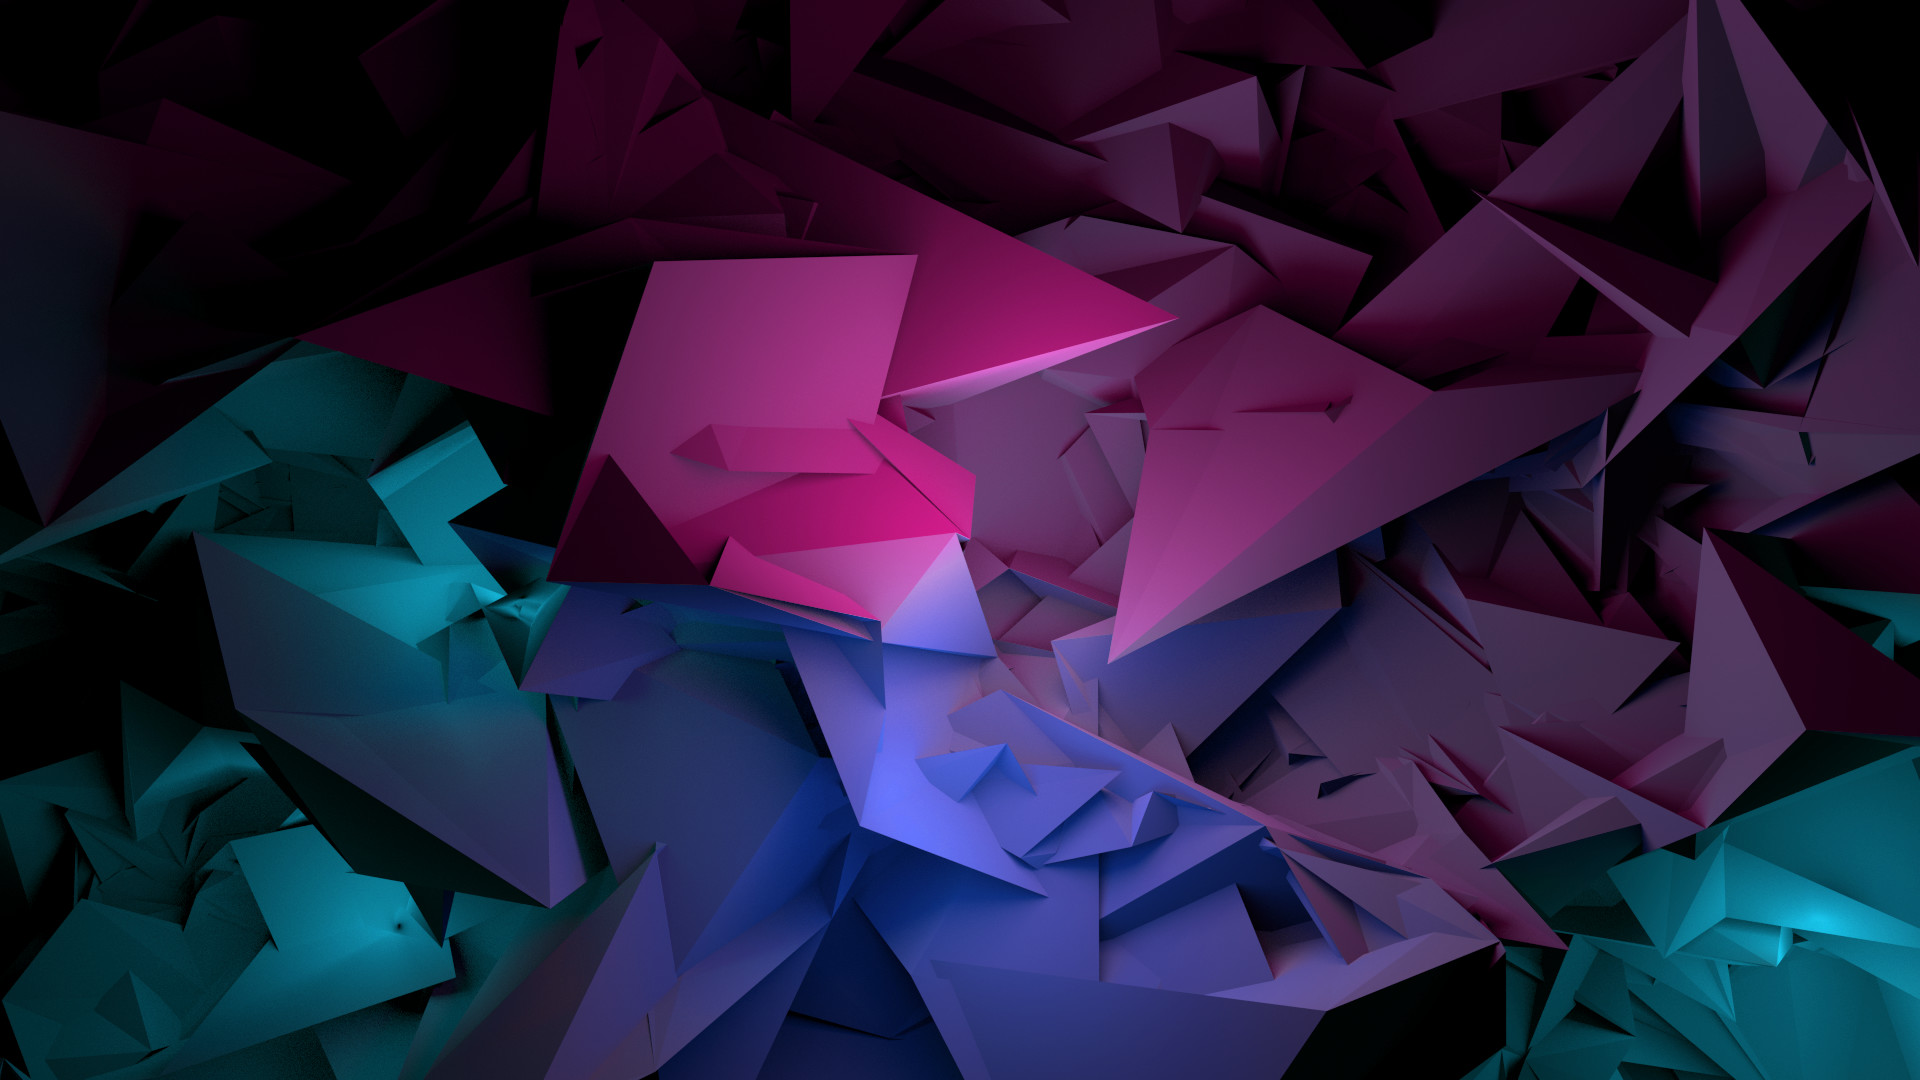 Abstract Magneto Wallpaper D By Charlie Henson 1920x1080